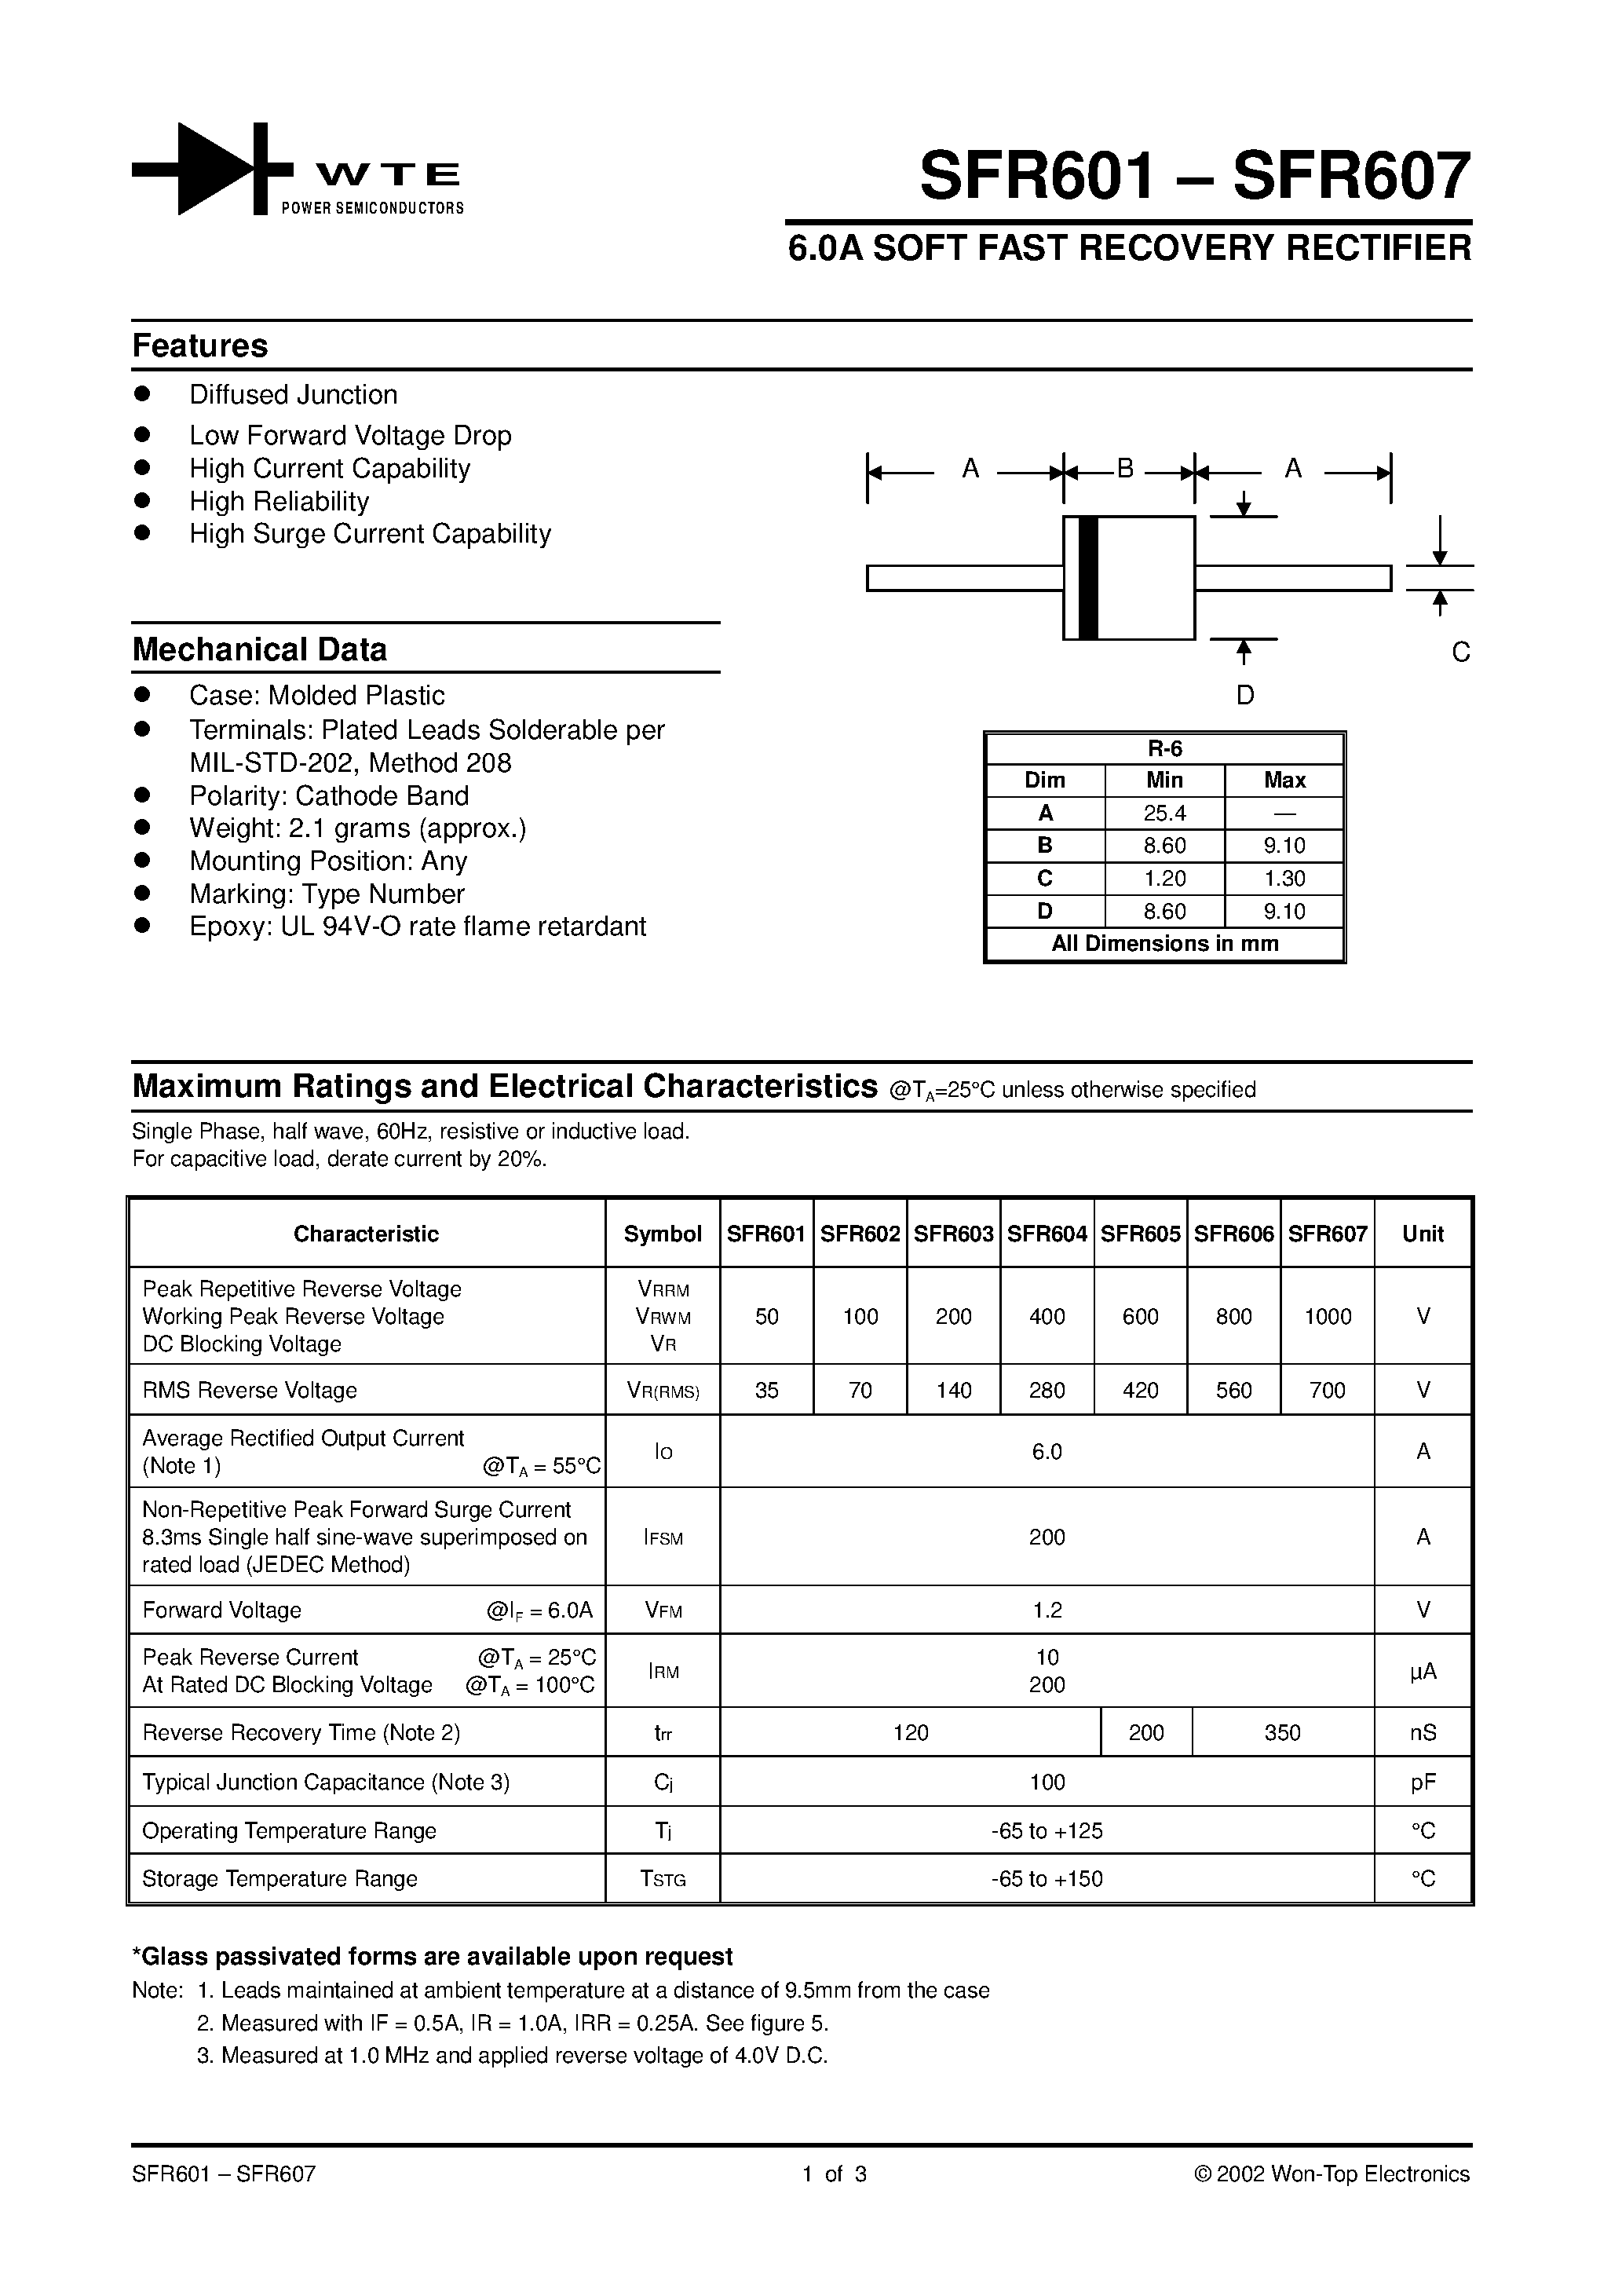 Datasheet SFR607-T3 - 6.0A SOFT FAST RECOVERY RECTIFIER page 1